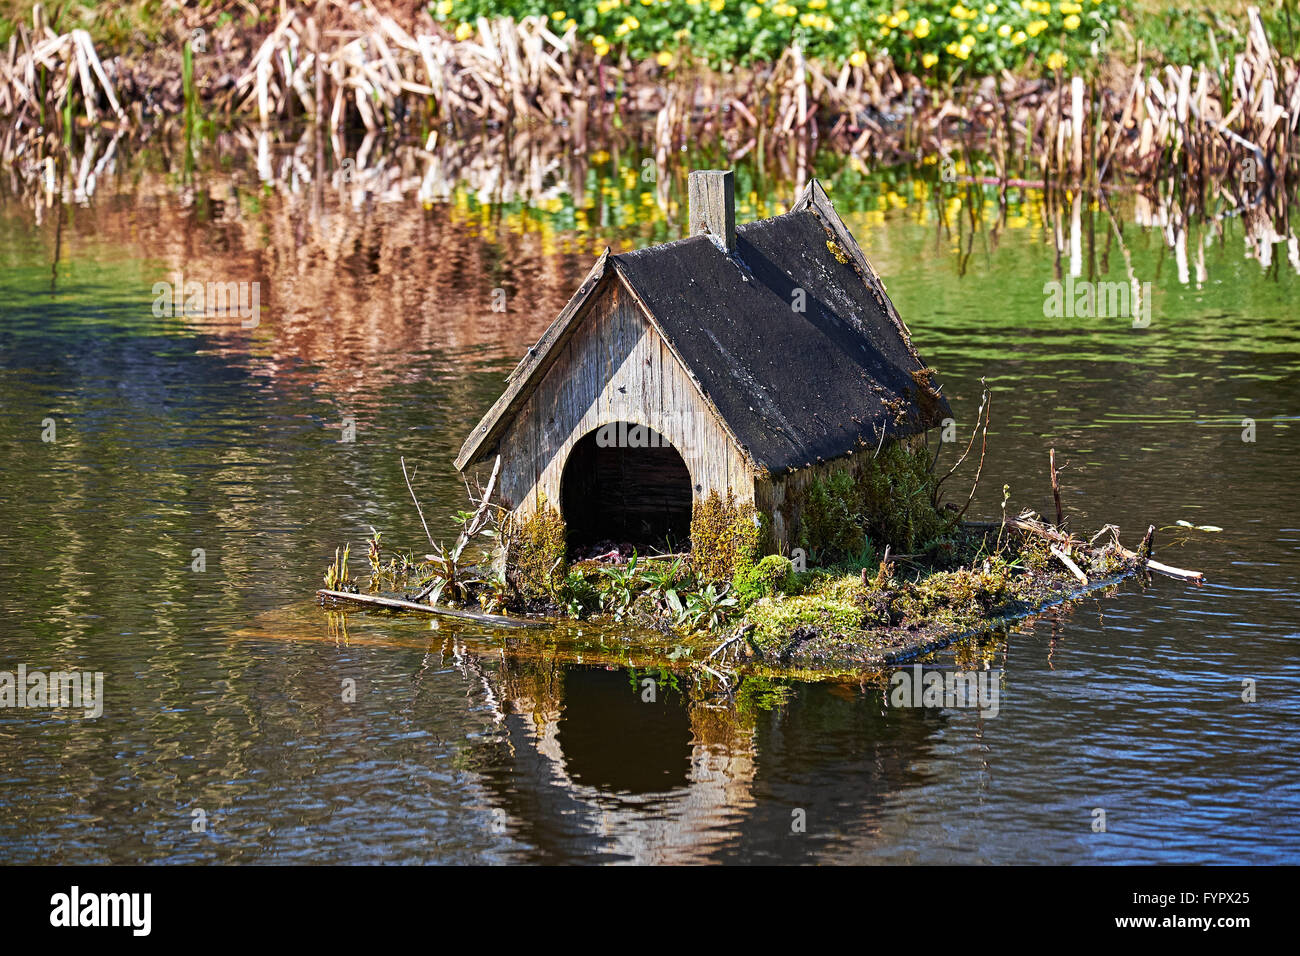 Old duck house made of wood on a raft on a pond Stock Photo